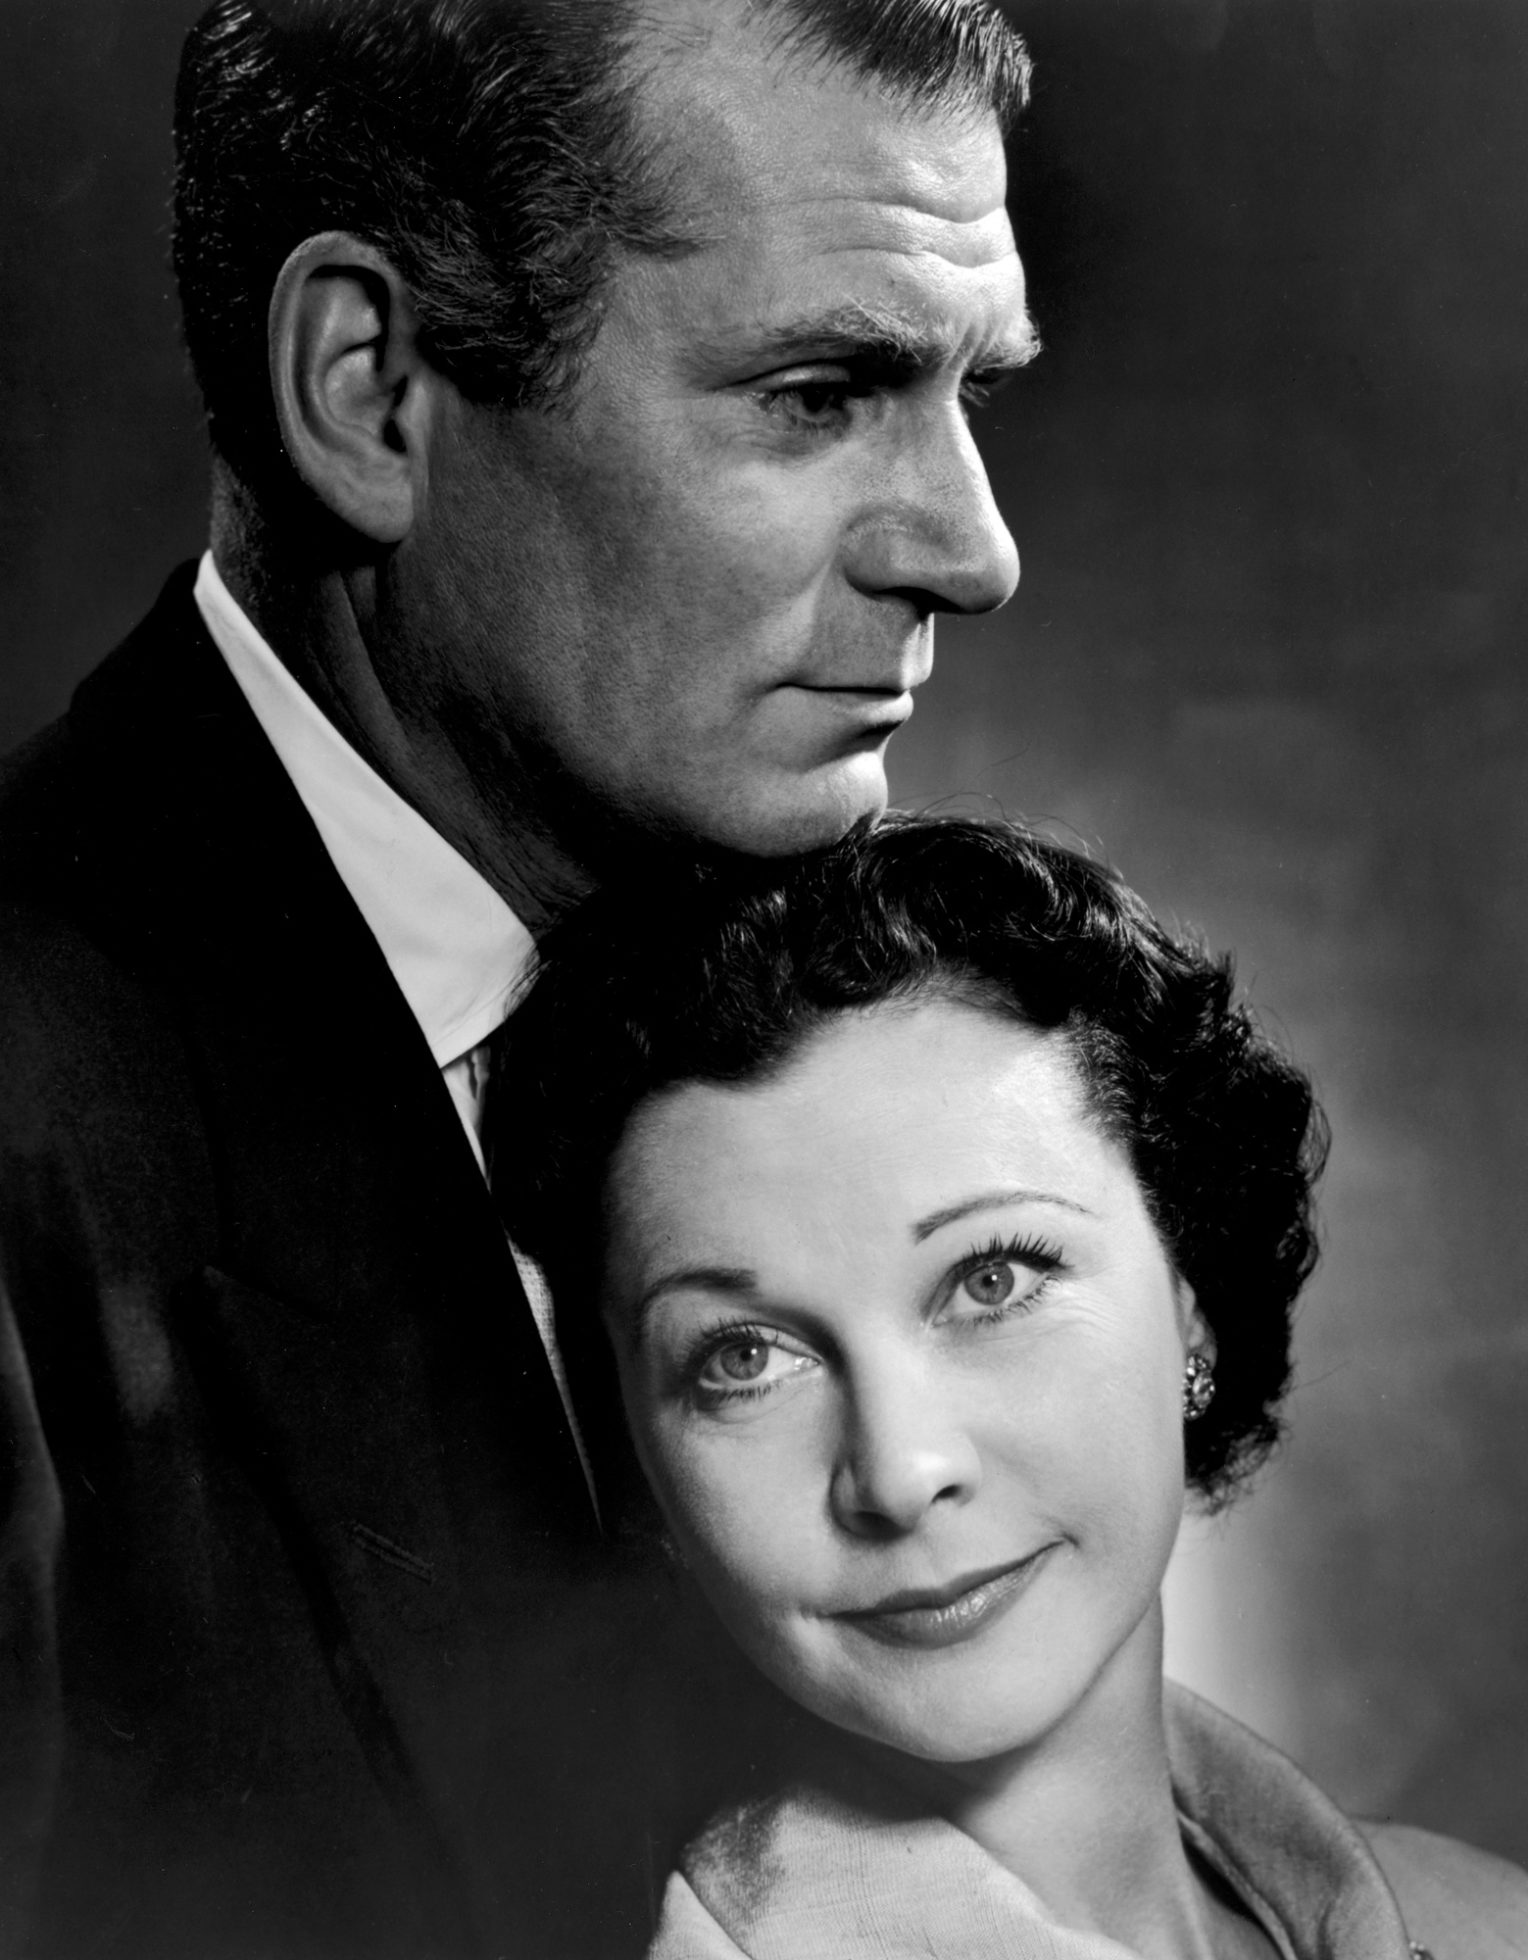 Sir and Lady Laurence Olivier